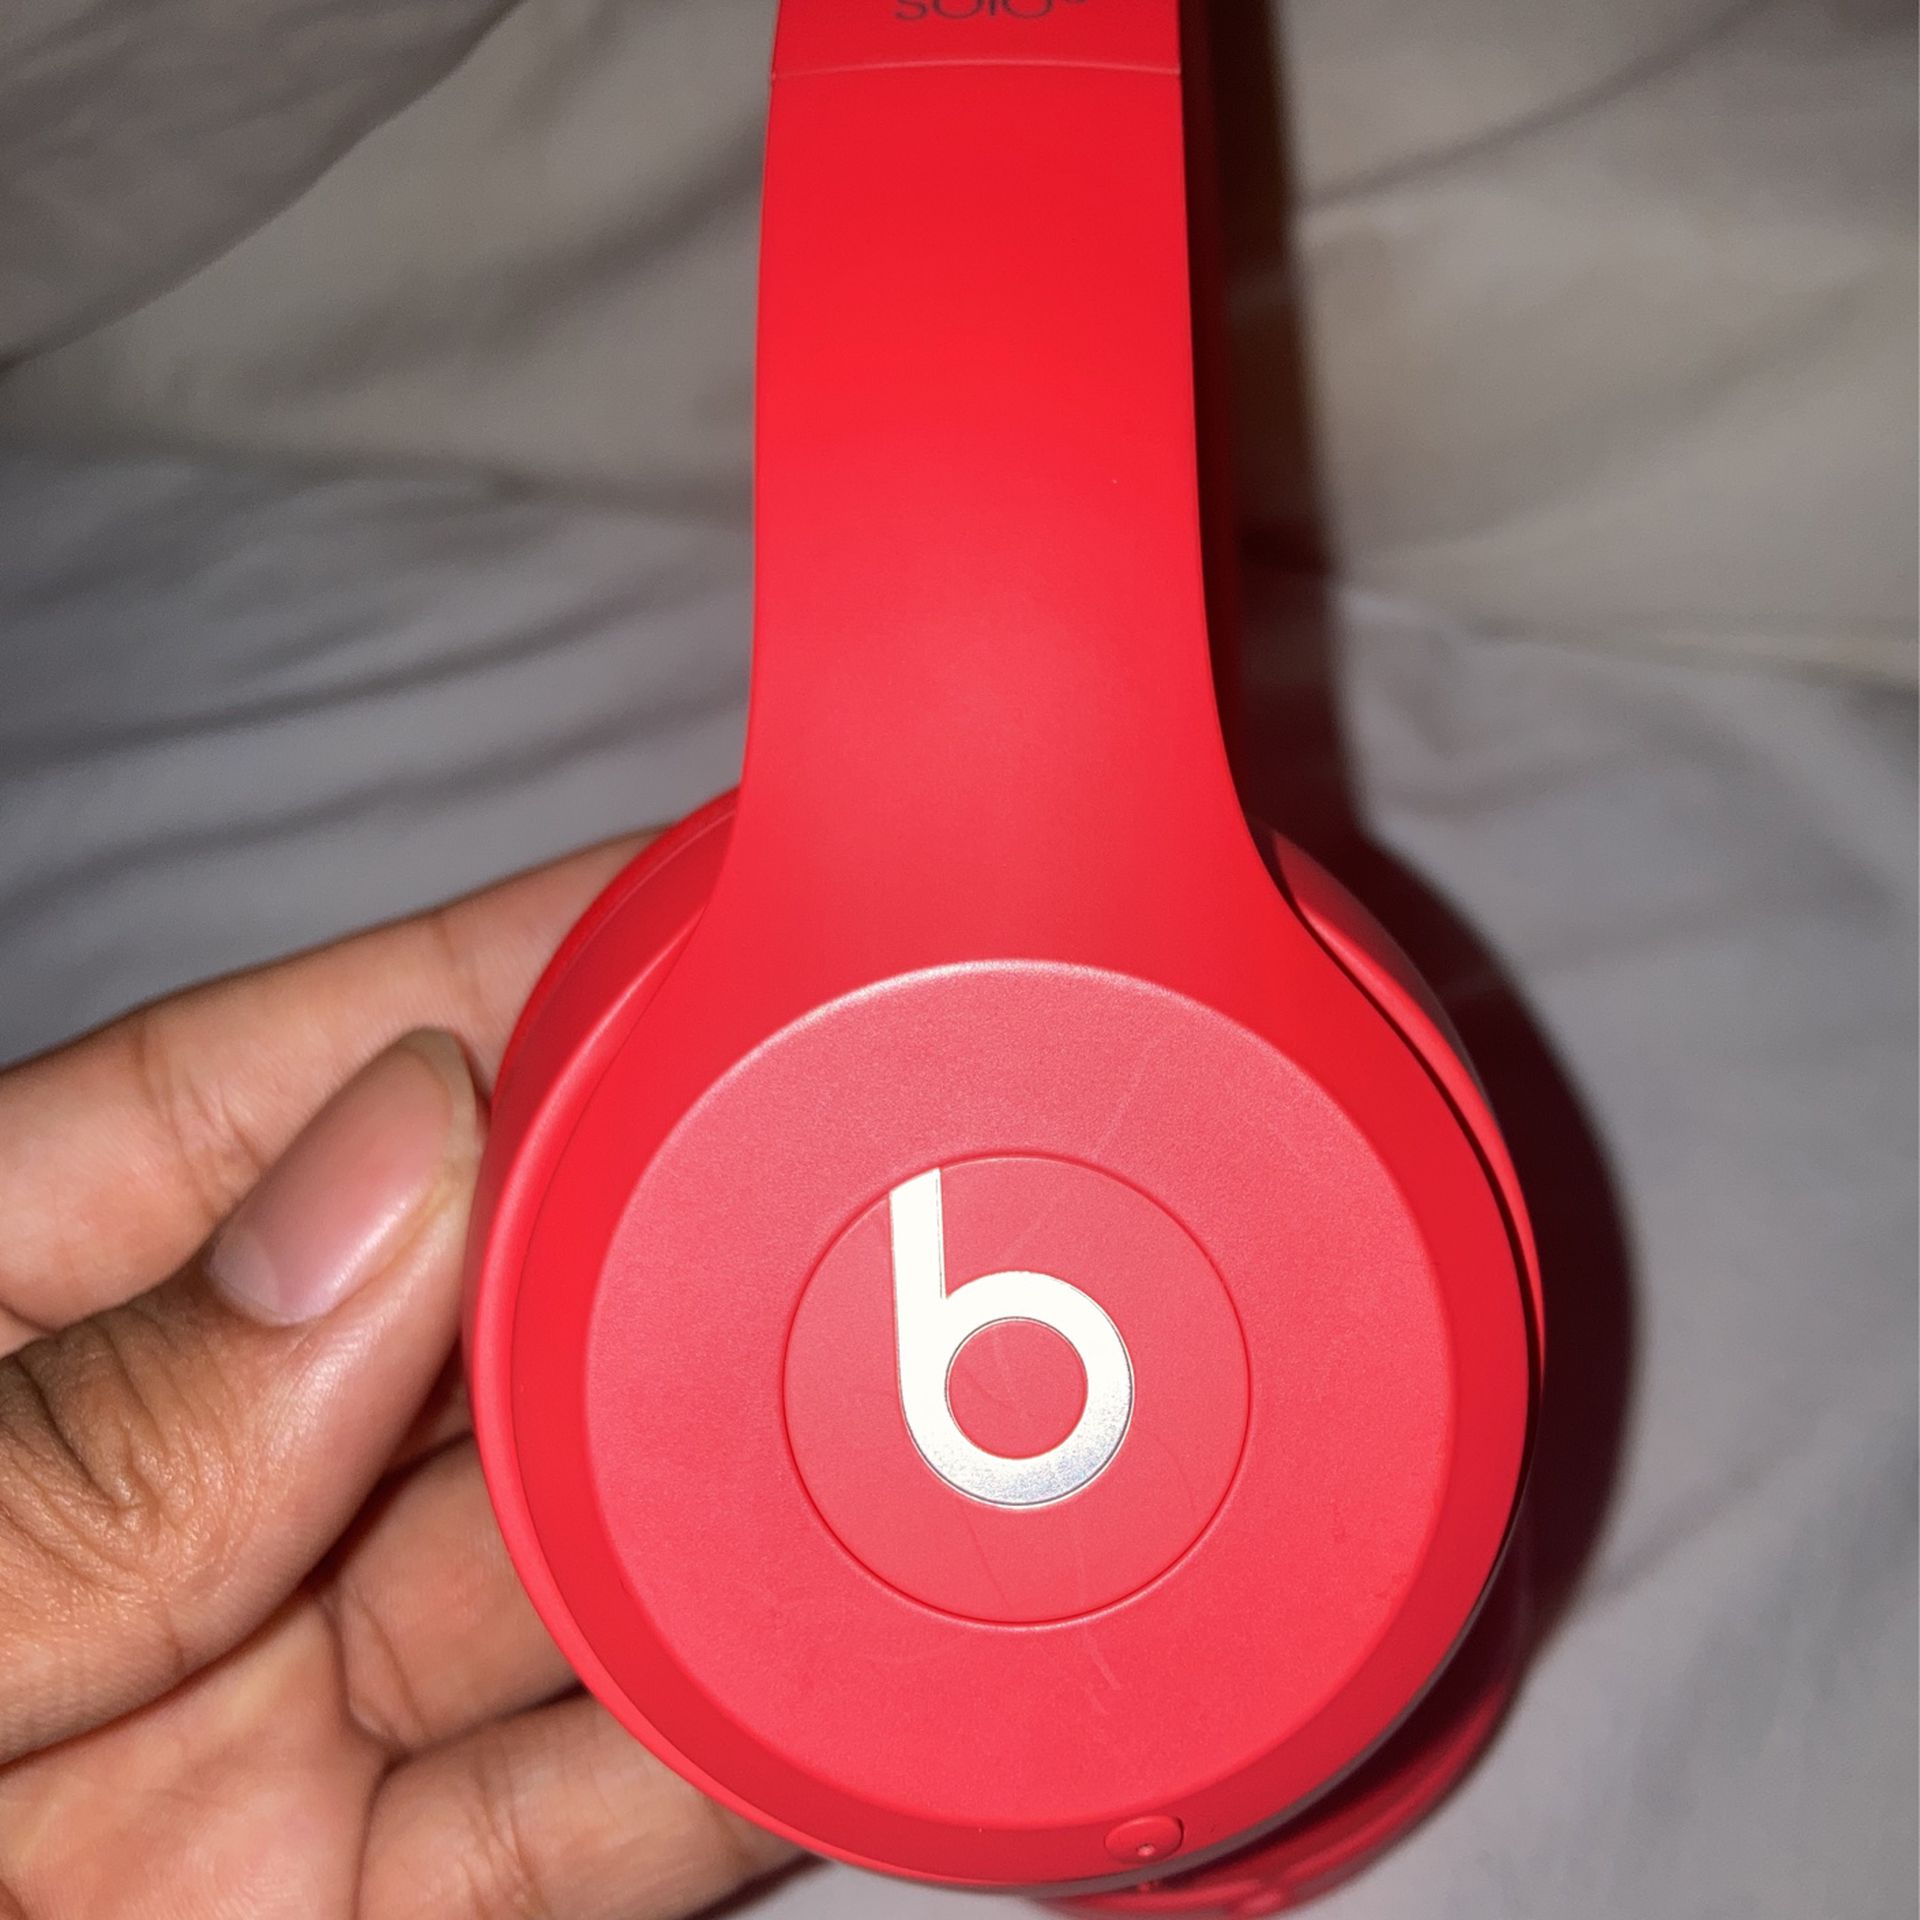 Solo 3 Red Beats Wireless 